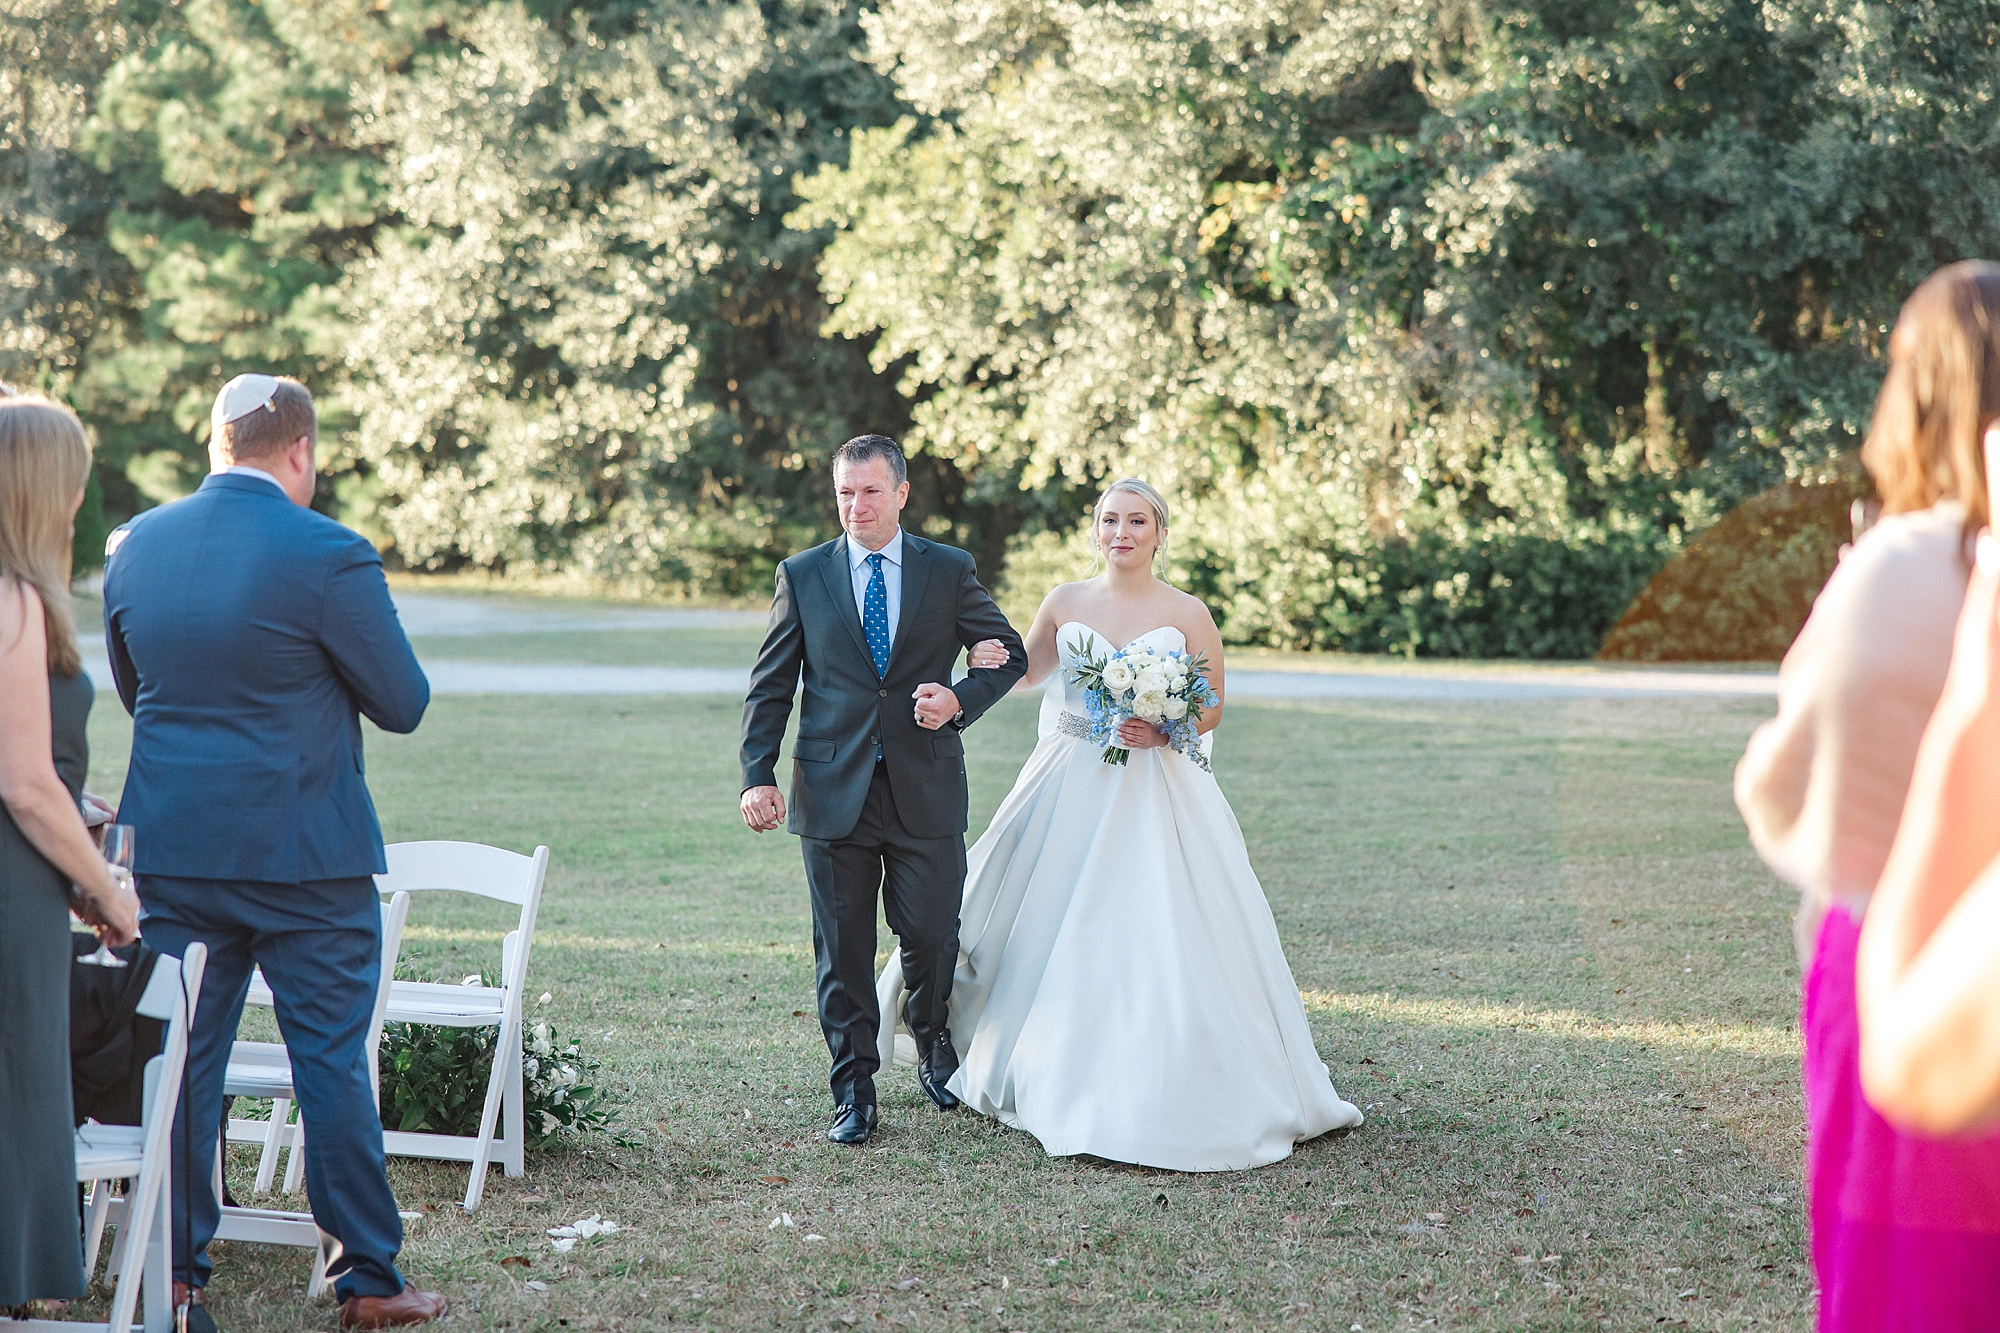 father walks daughter down the aisle at Southern wedding at Wingate Place